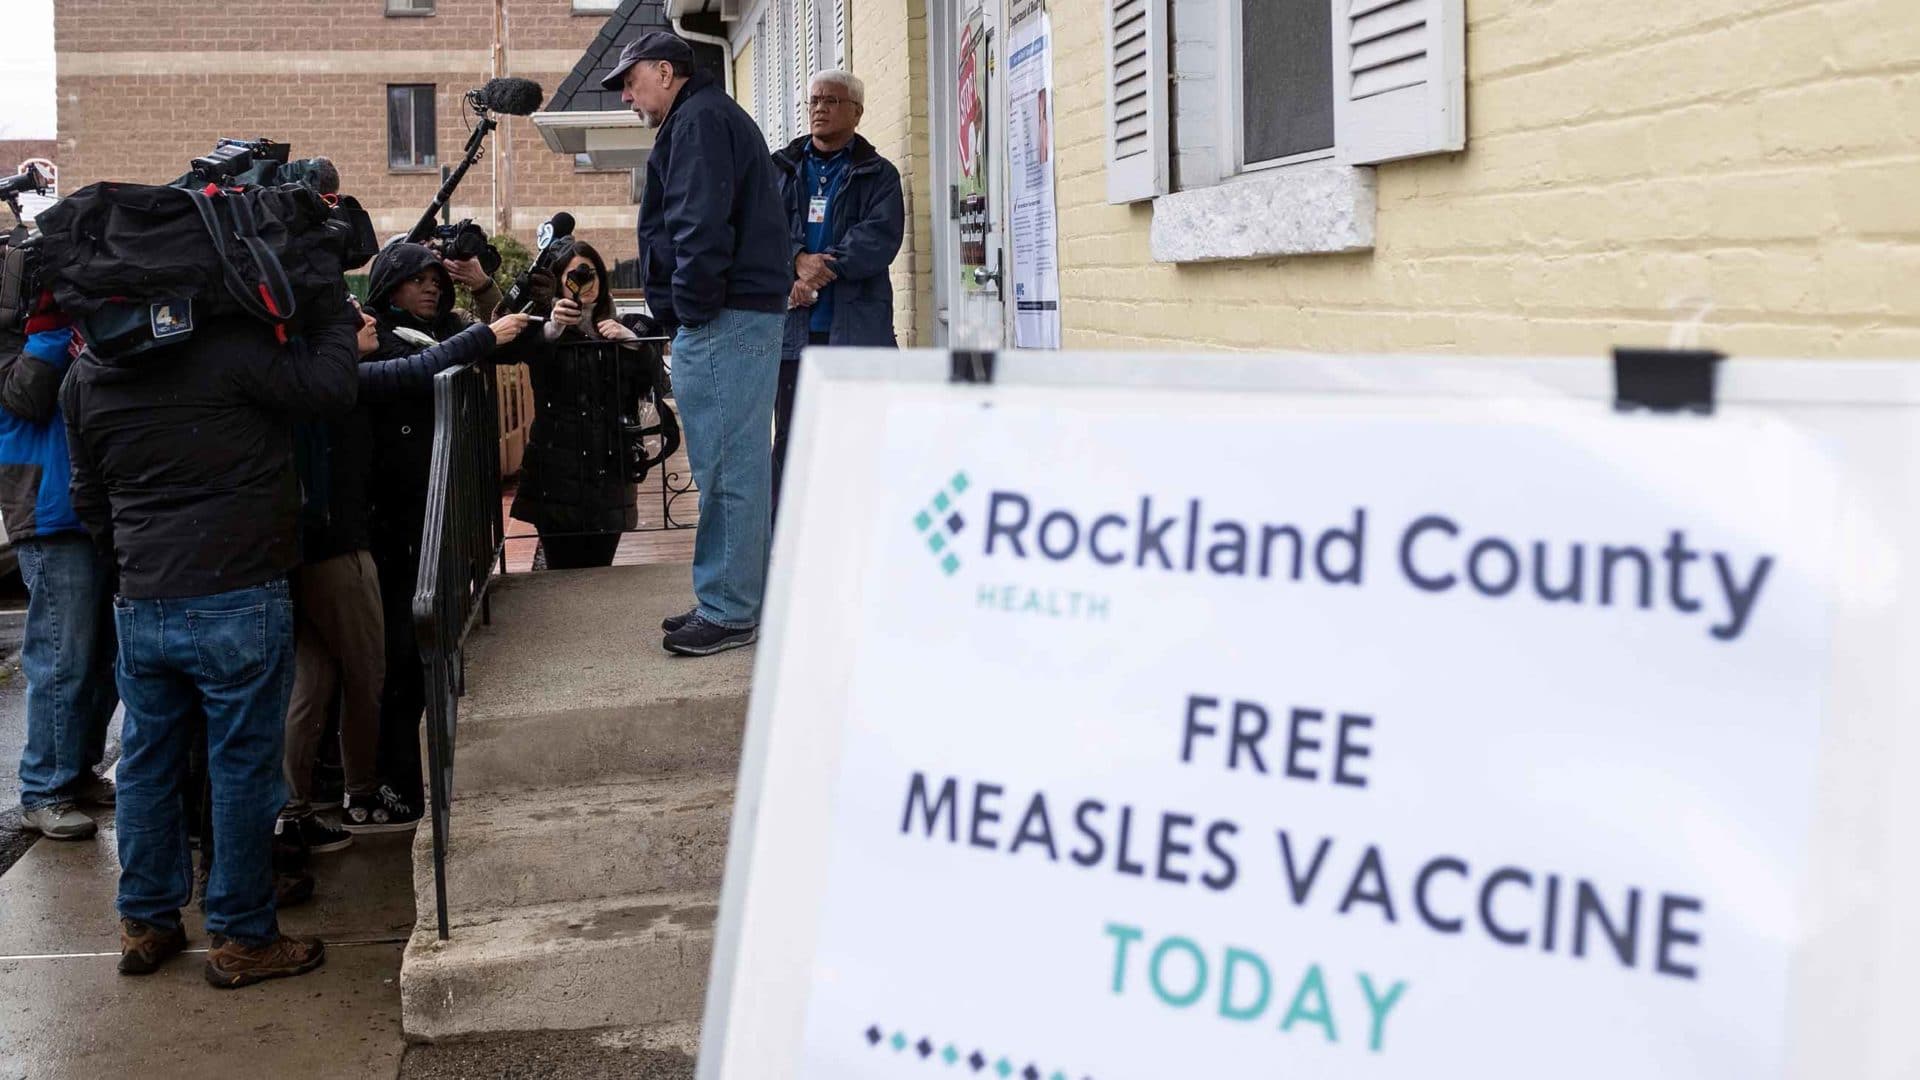 As of Friday, there were 214 confirmed measles cases in New York's Rockland County, and every day my wife goes to work here, we worry that she will soon acquire the measles, too.